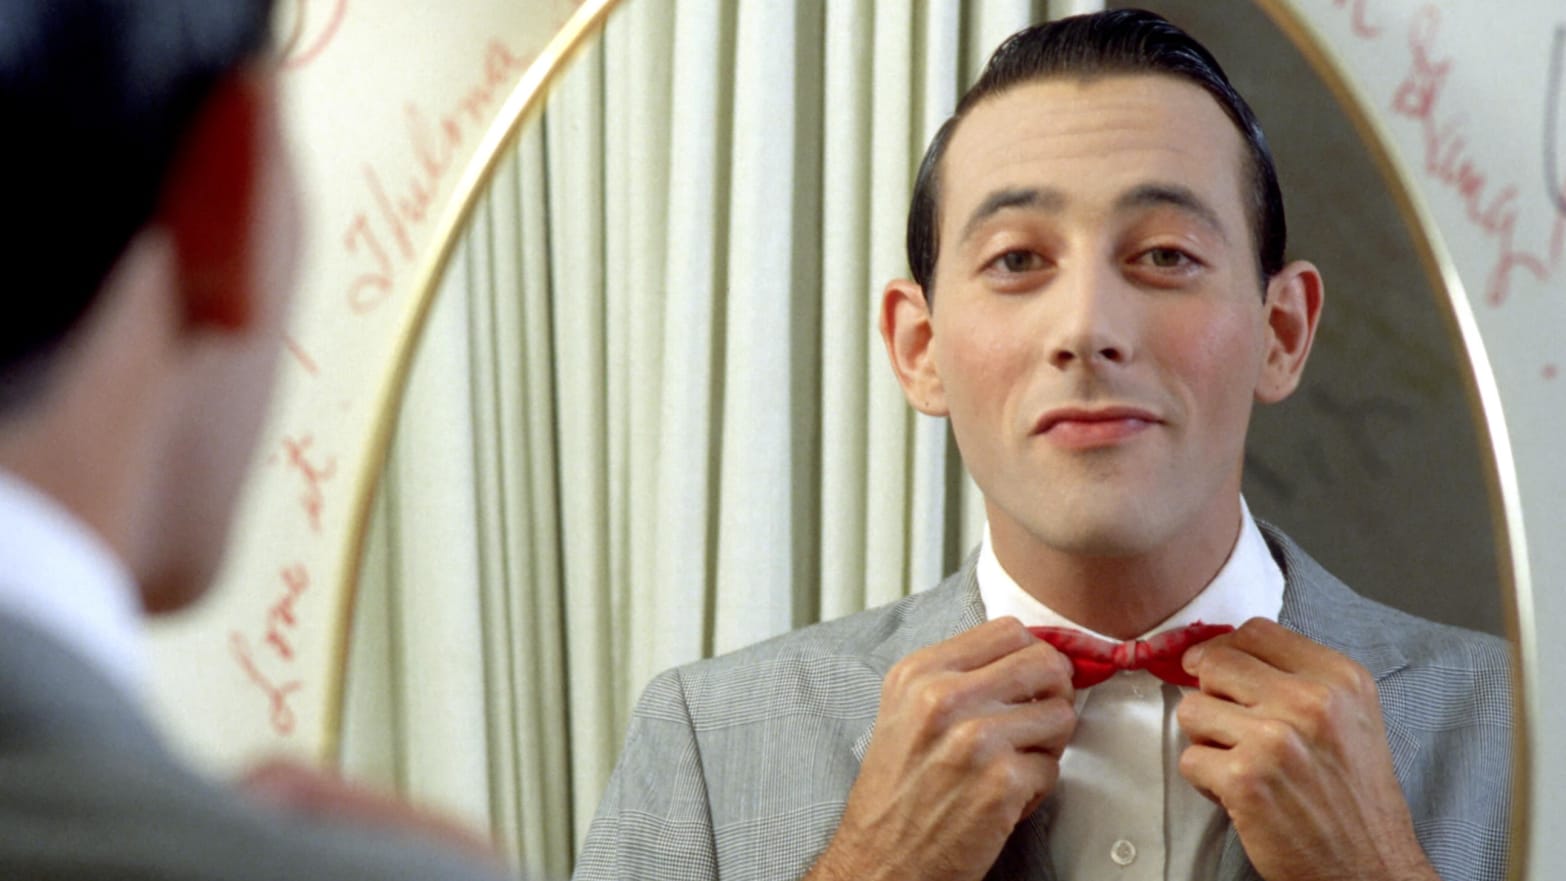 Actor Paul Reubens poses for a portrait dressed as his character Pee-wee Herman in May 1980.